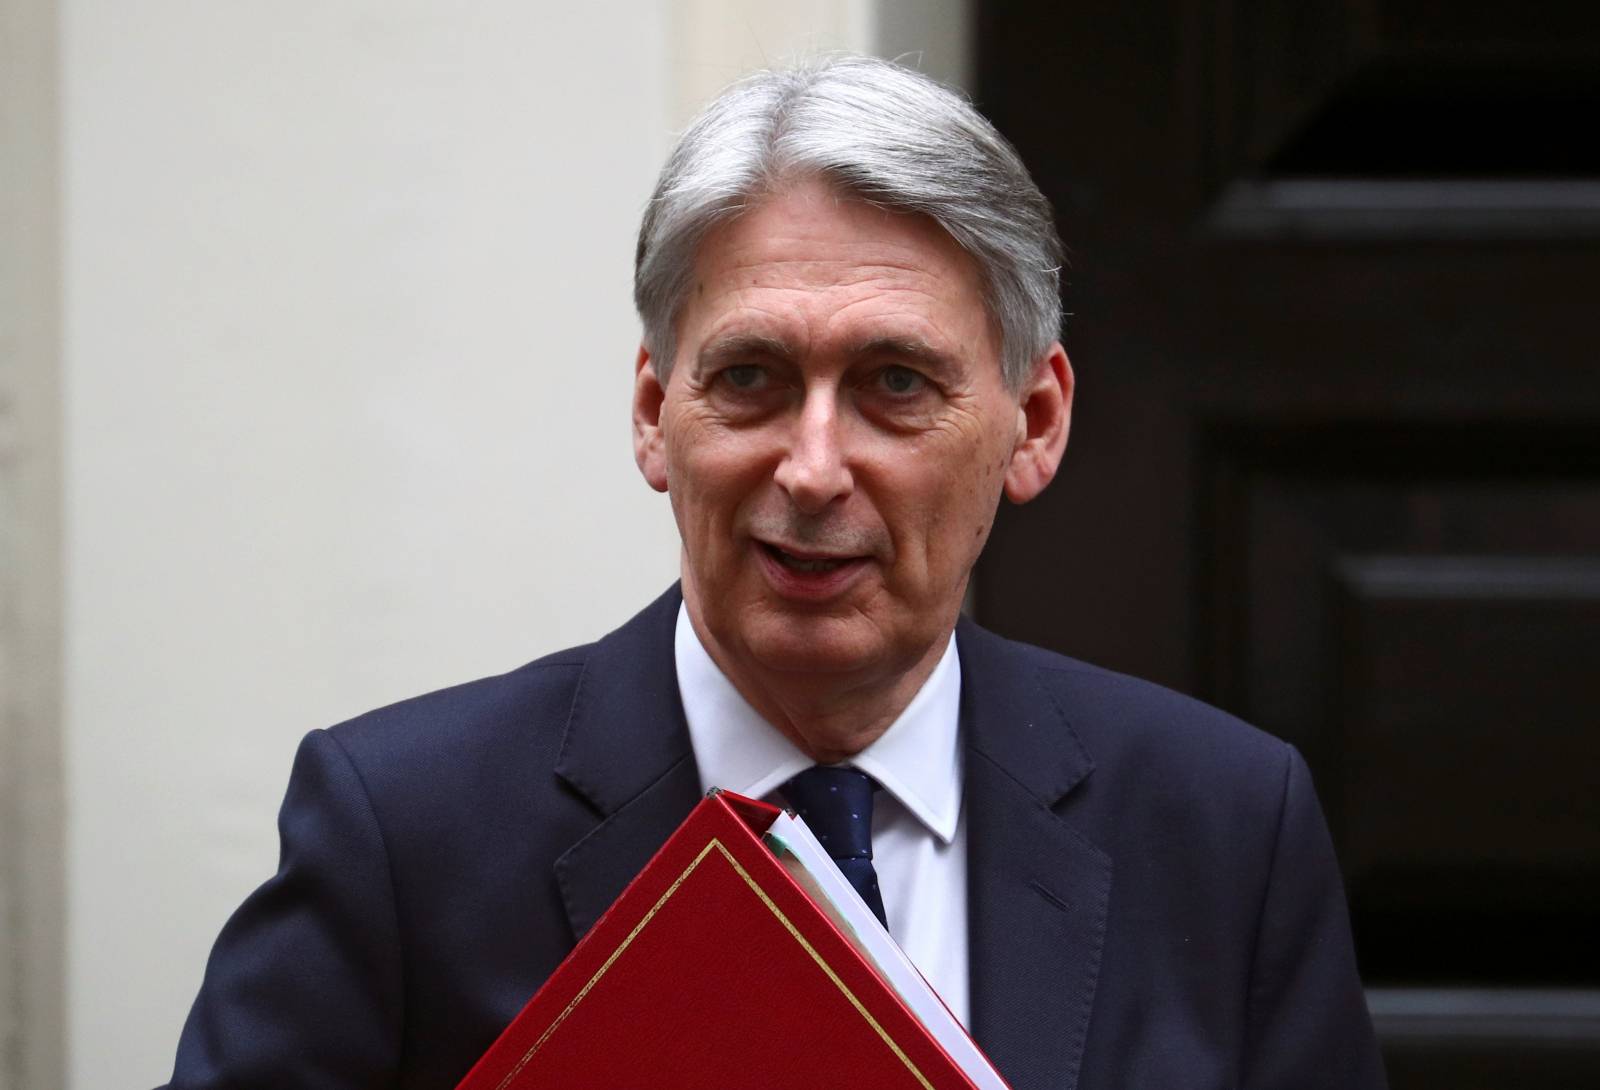 Britain's Chancellor of the Exchequer Philip Hammond is seen outside Downing Street in London